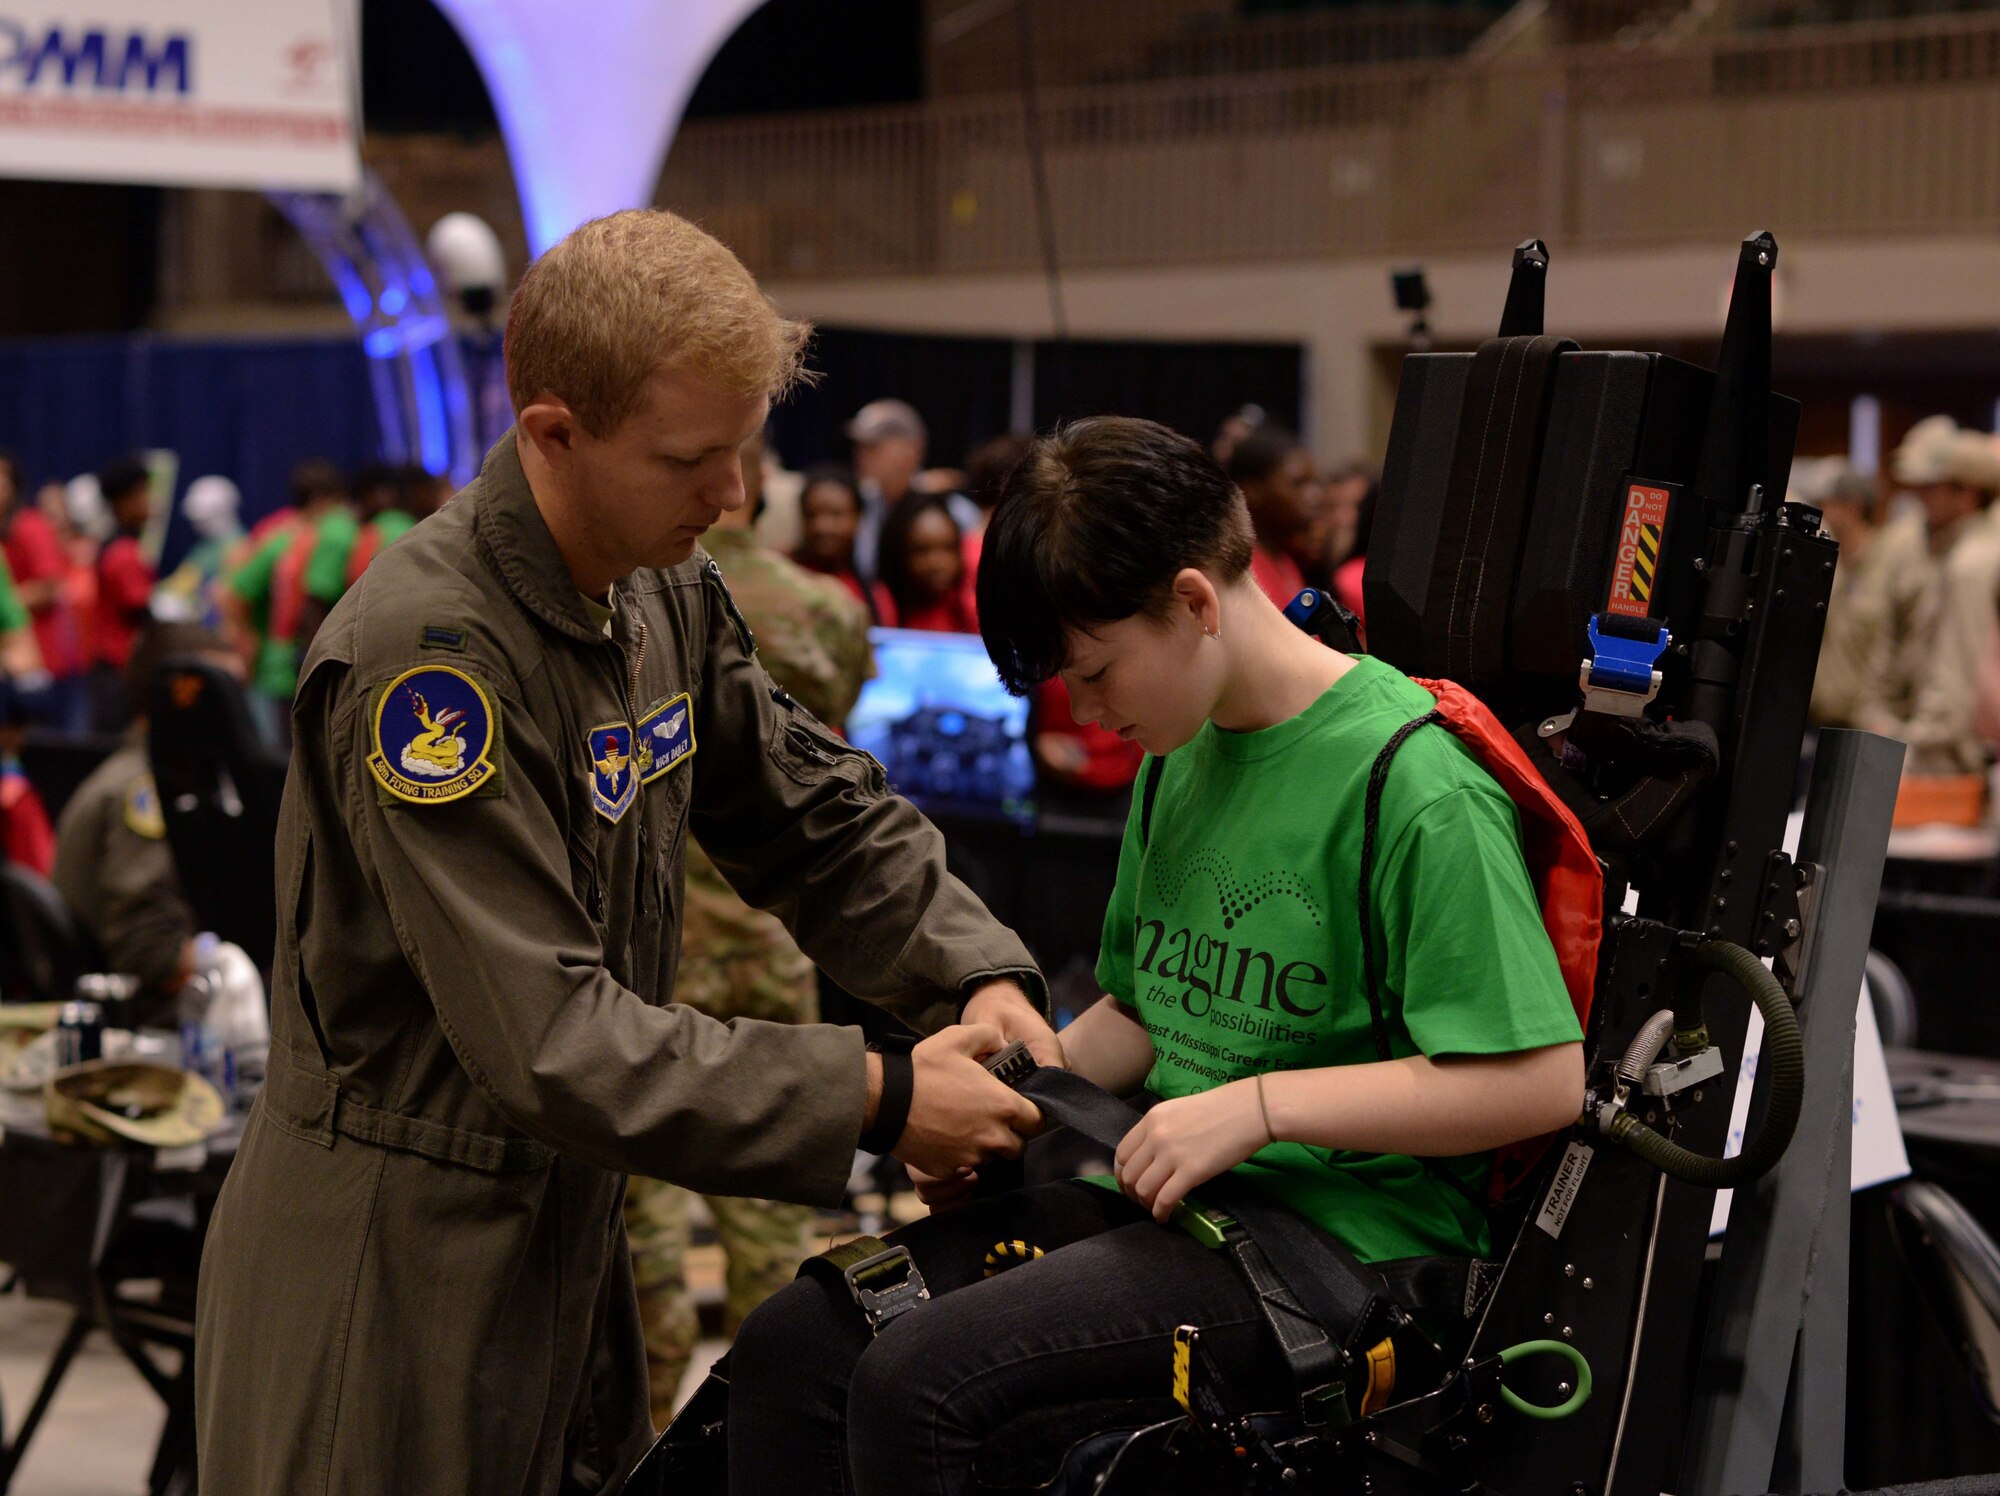 First Lt. Nicholas Bailey, 50th Flying Training Squadron instructor pilot at Columbus Air Force Base, Miss., shows a student how to strap into a pilot seat during the Imagine the Possibilities Career Expo Oct. 1, 2019, at the BancorpSouth Arena in Tupelo. Nearly 100 Airmen from Columbus AFB showcased 13 Air Force career fields to more than 7,200 eighth graders during the expo from Oct. 1-3. (U.S. Air Force photo by Airman Davis Donaldson)